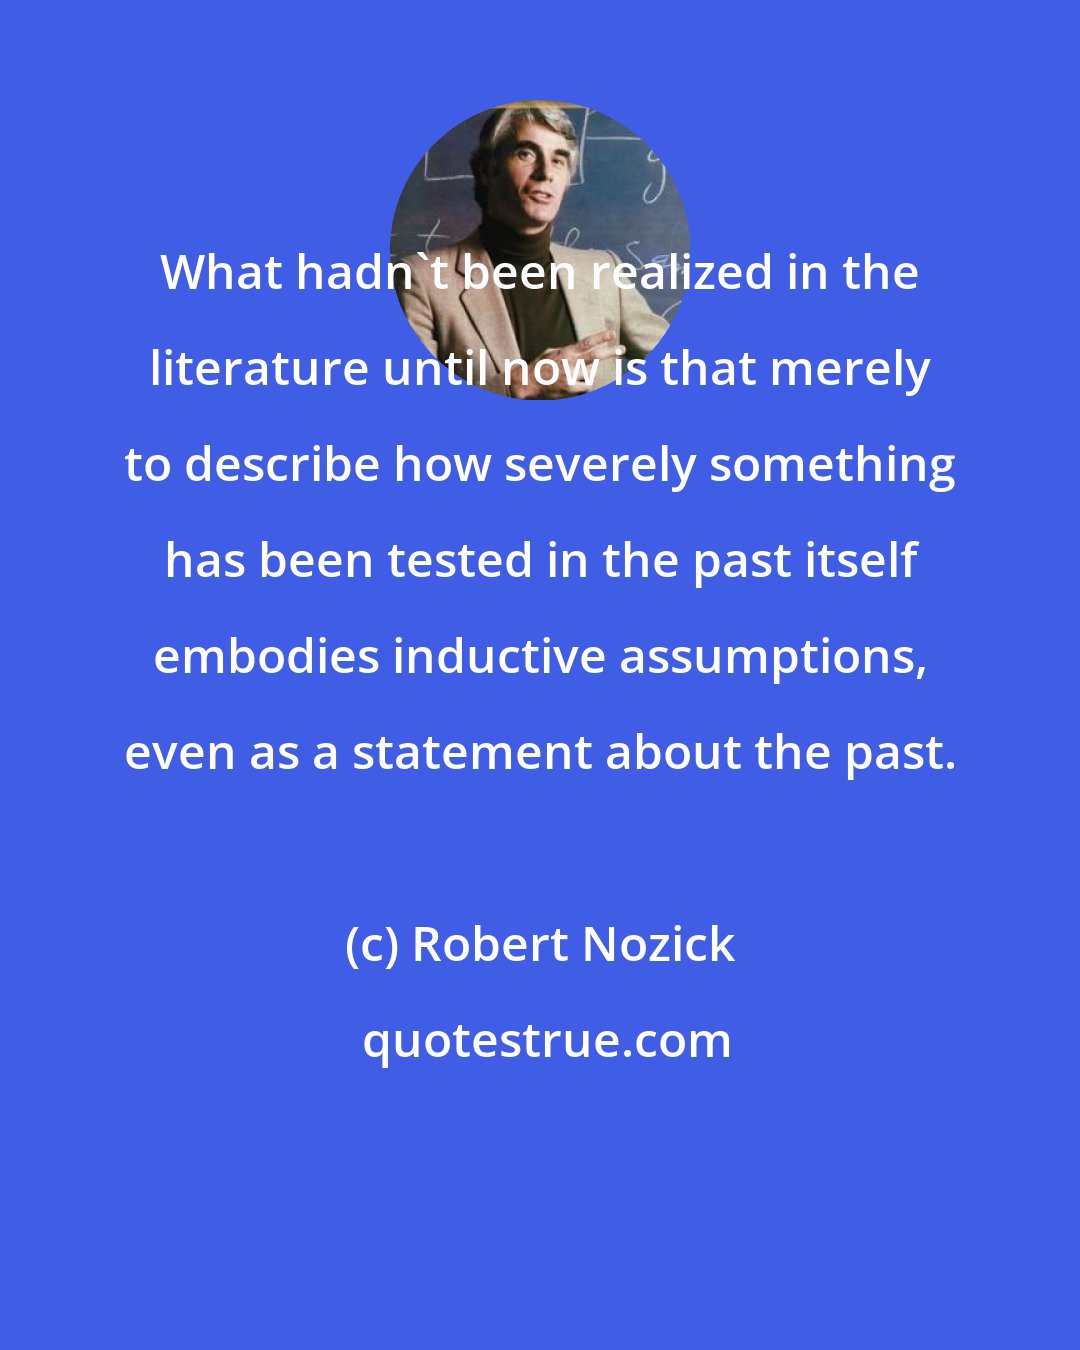 Robert Nozick: What hadn't been realized in the literature until now is that merely to describe how severely something has been tested in the past itself embodies inductive assumptions, even as a statement about the past.